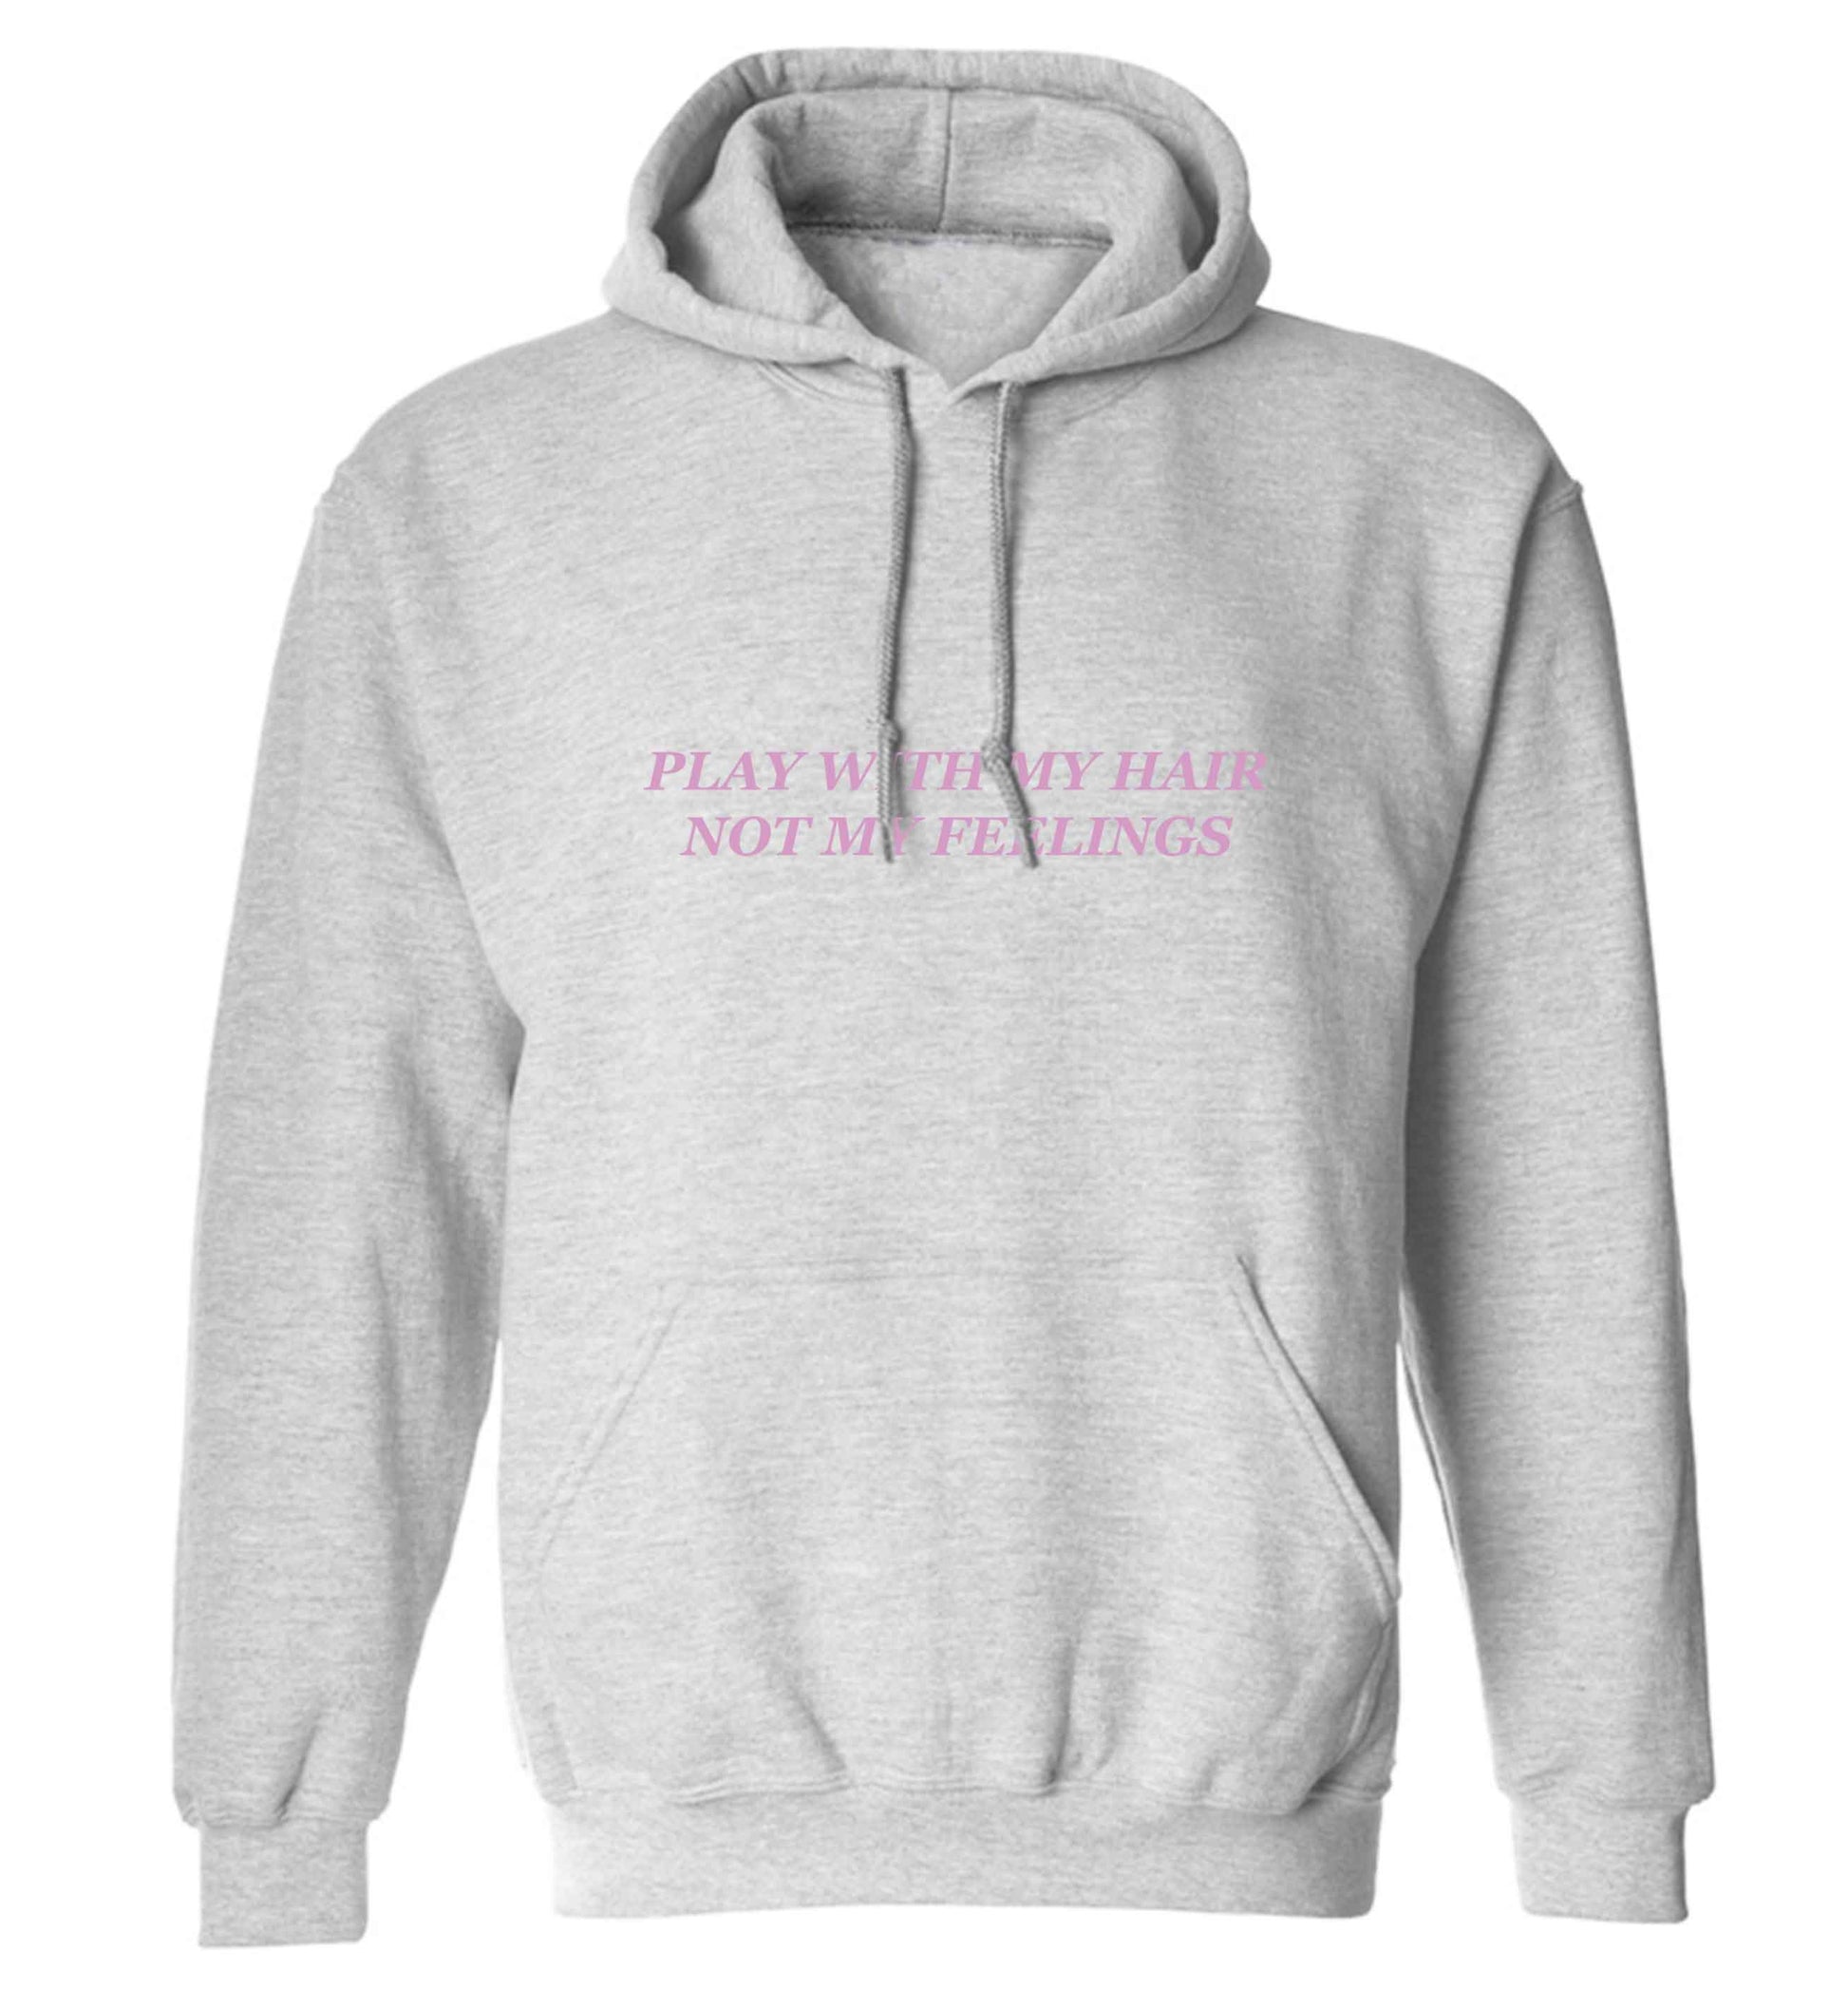 Play with my hair not my feelings adults unisex grey hoodie 2XL